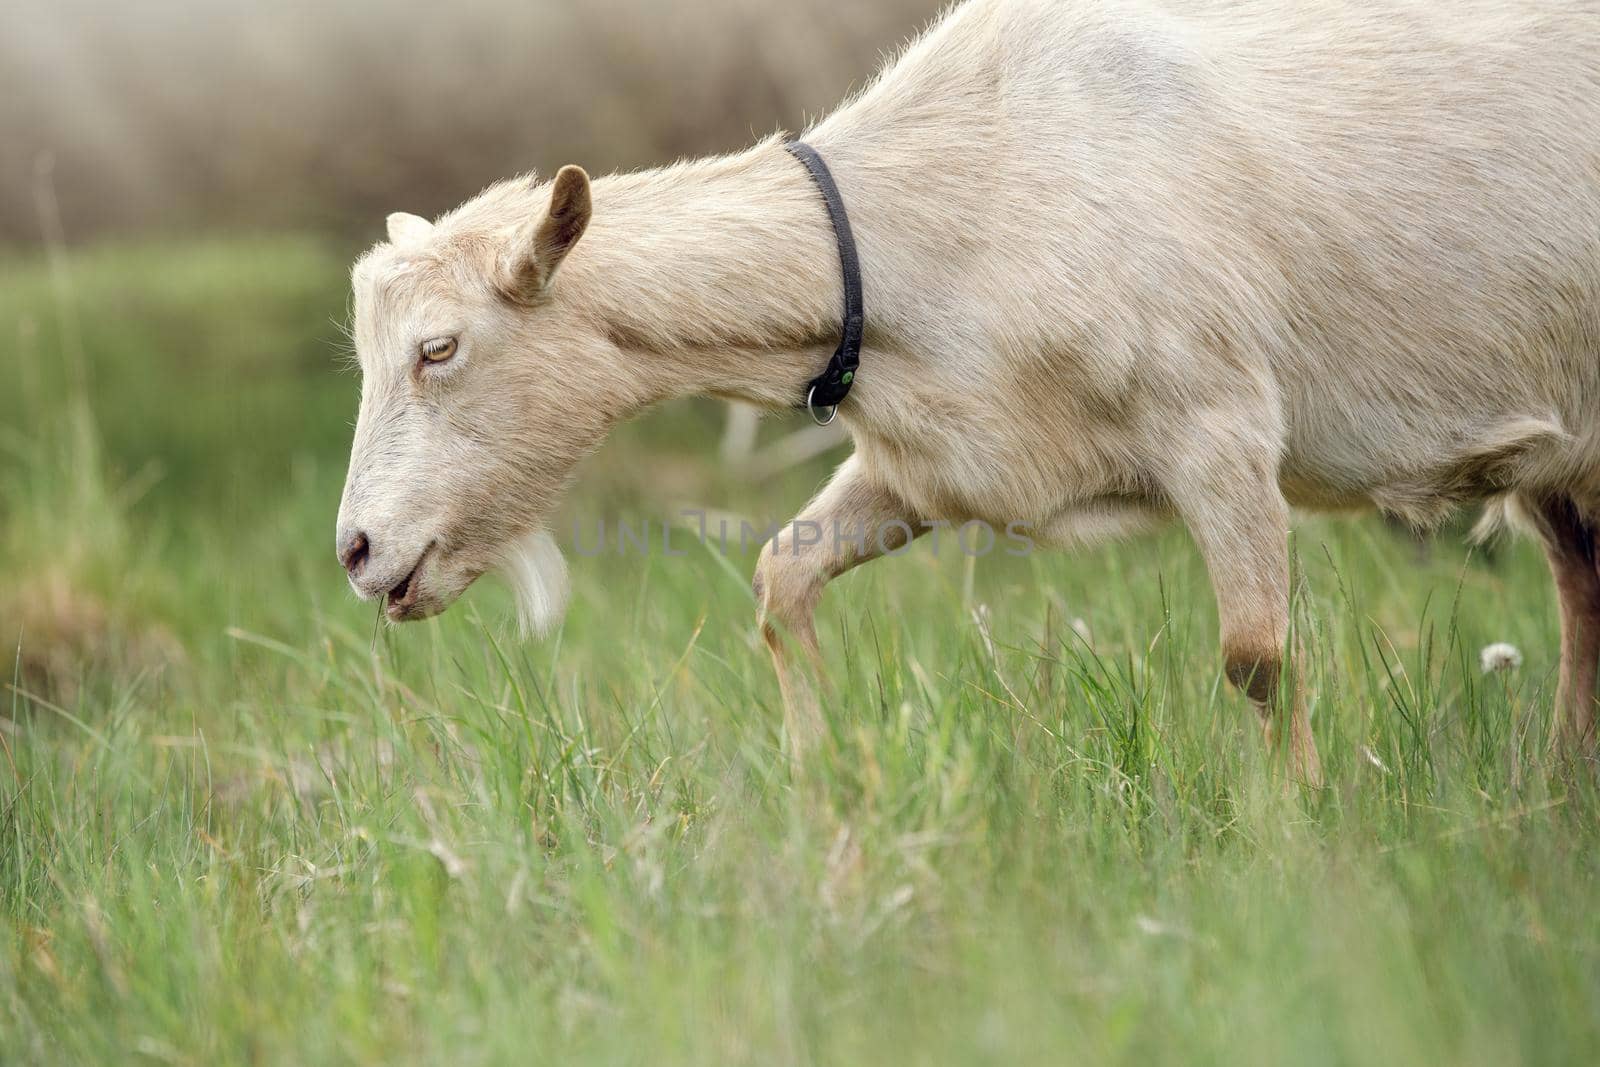 Beige old goat with experience looking for tastier plants in a meadow by Lincikas